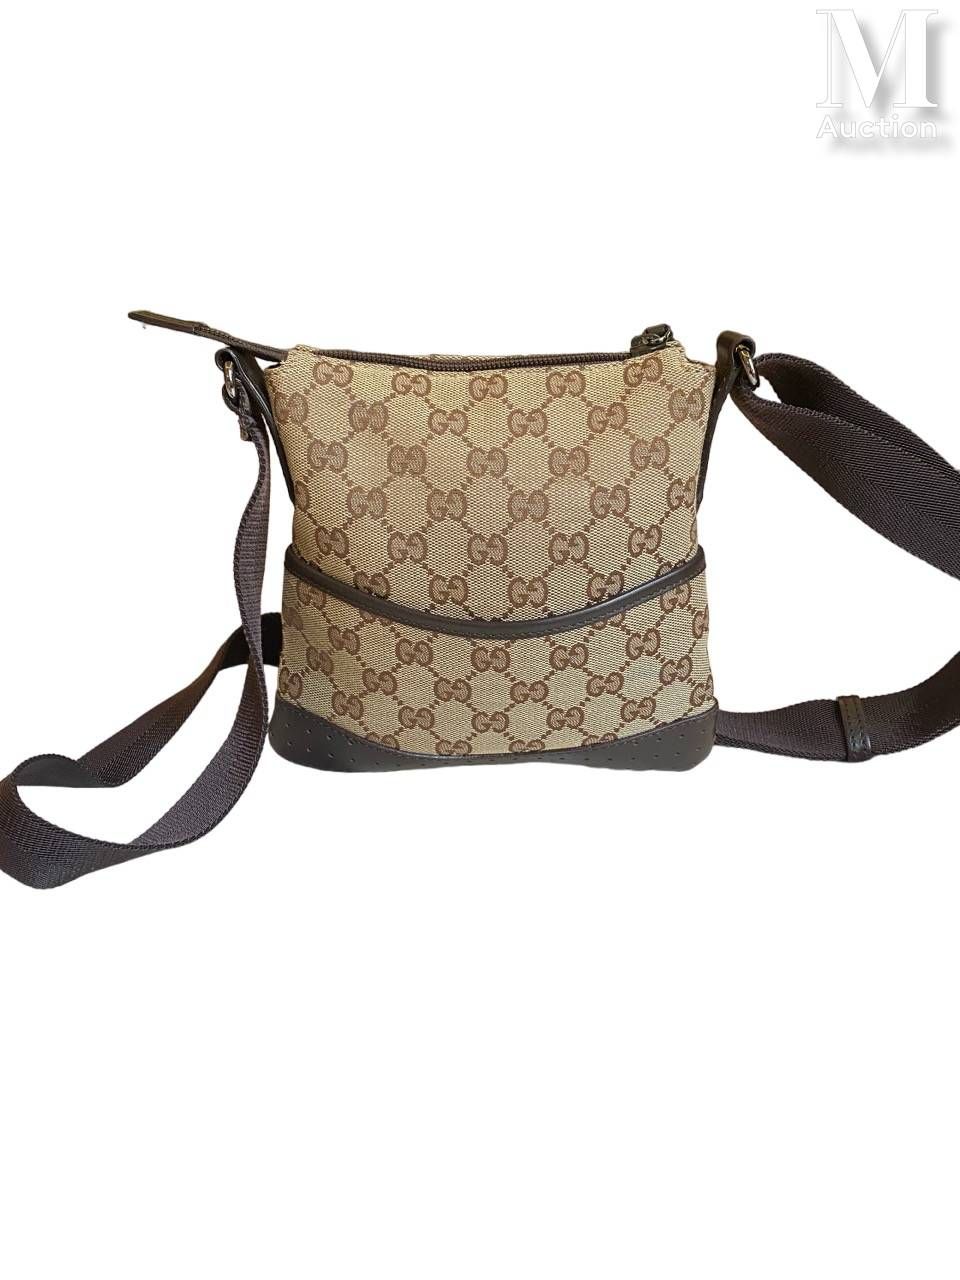 GUCCI MESSENGER BAG
monogrammed canvas, chocolate leather, silver-plated metal t&hellip;